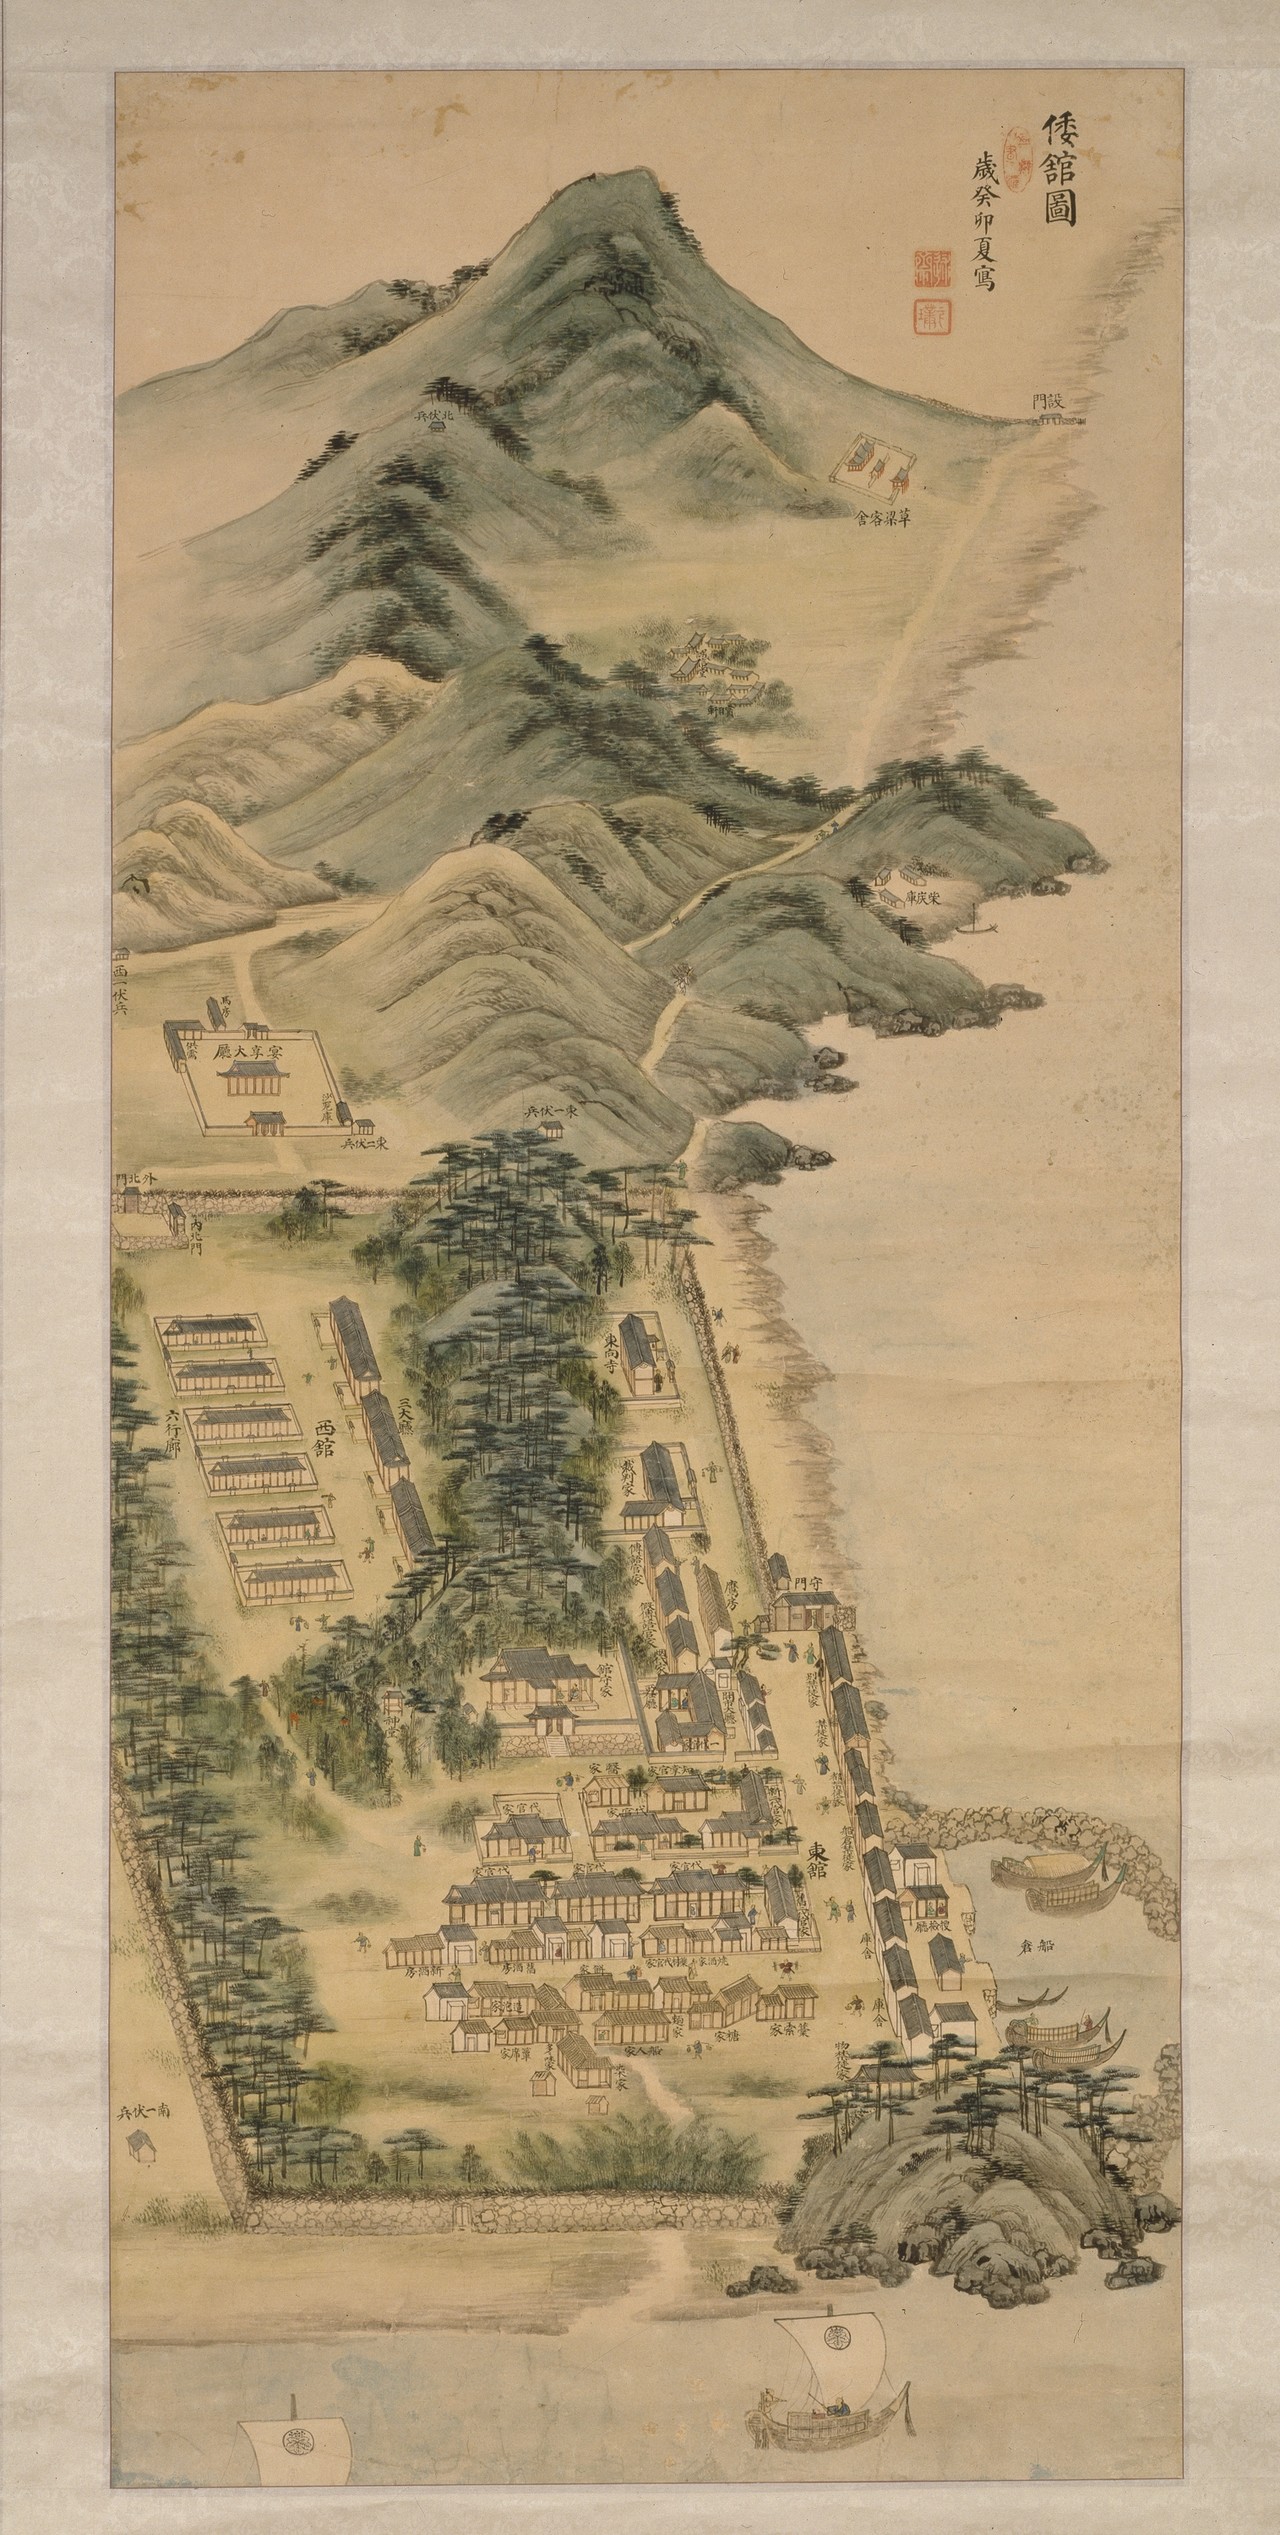 <i>Painting of Japanese Residences in Choryang</i> (倭館圖), Byun Park, Joseon dynasty, 1783, ink and color on paper, 132.0x58.0cm. National Museum of Korea. ⓒNational Museum of Korea / UNESCO Memory of the World